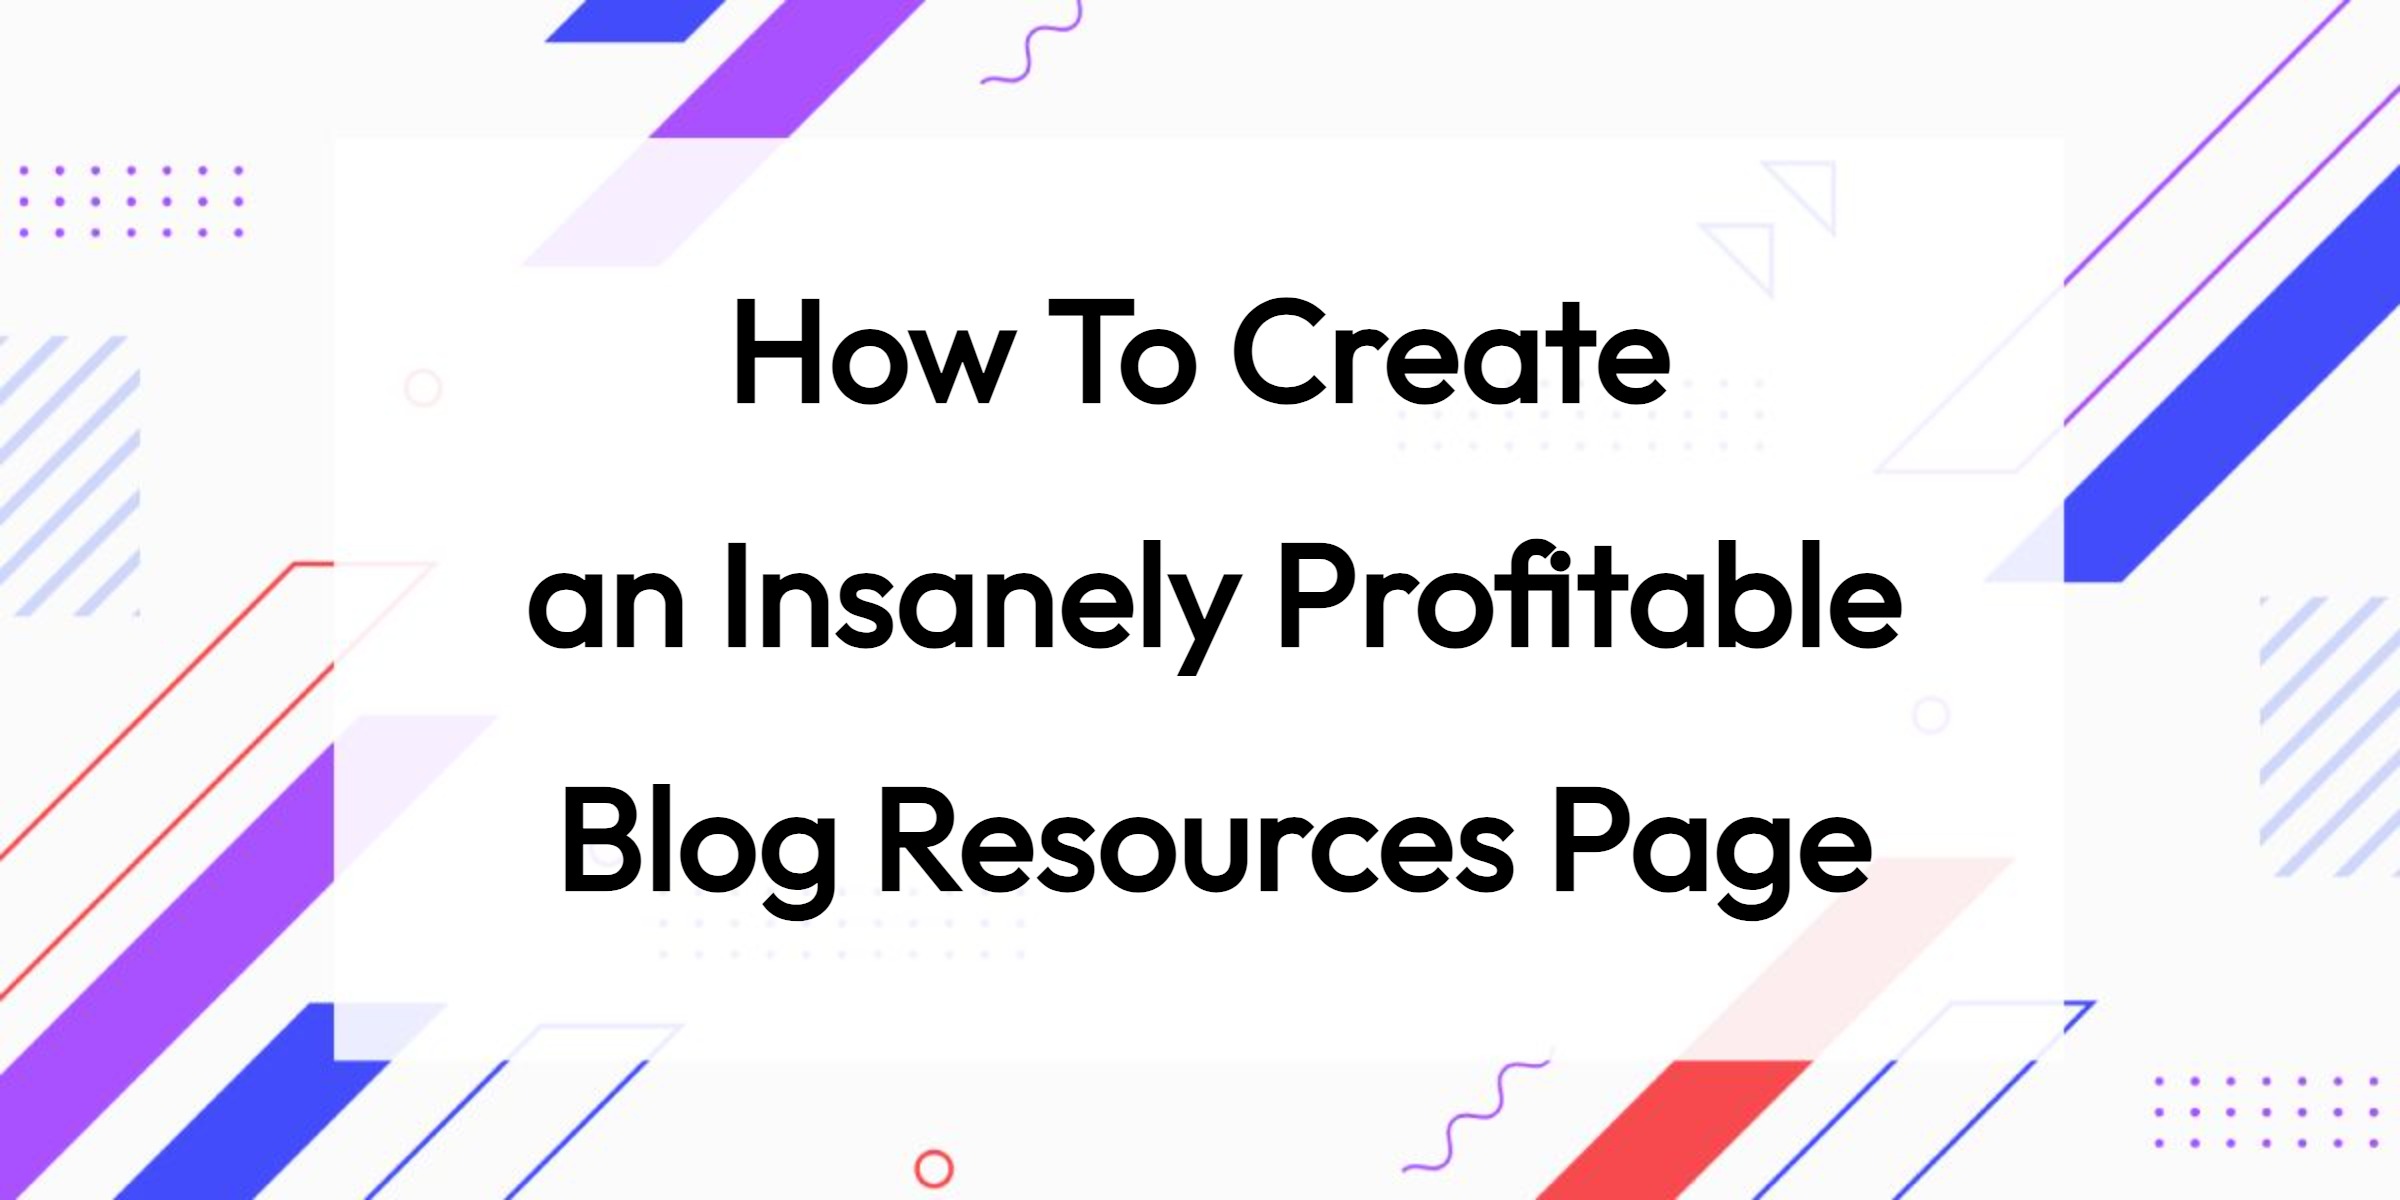 How To Create an Insanely Profitable Blog Resources Page: Better UX & More $$$